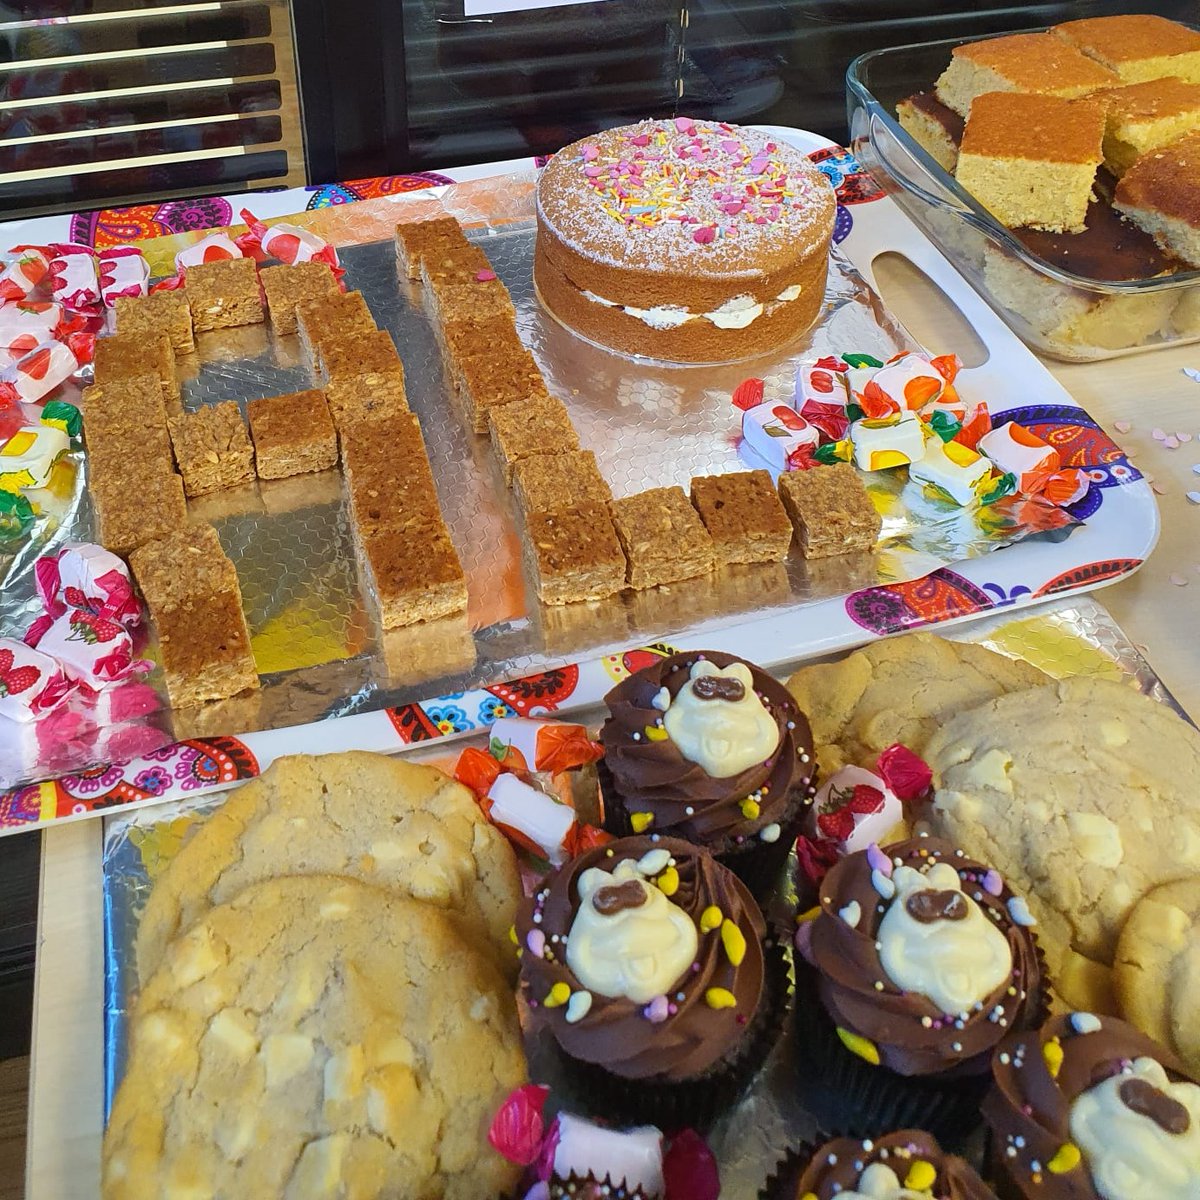 This week we have been fundraising for the London #LegalWalk with cake sales in our Bromley, Crystal Palace, and West Wickham offices.

A big thank you to everyone who baked and donated cakes!